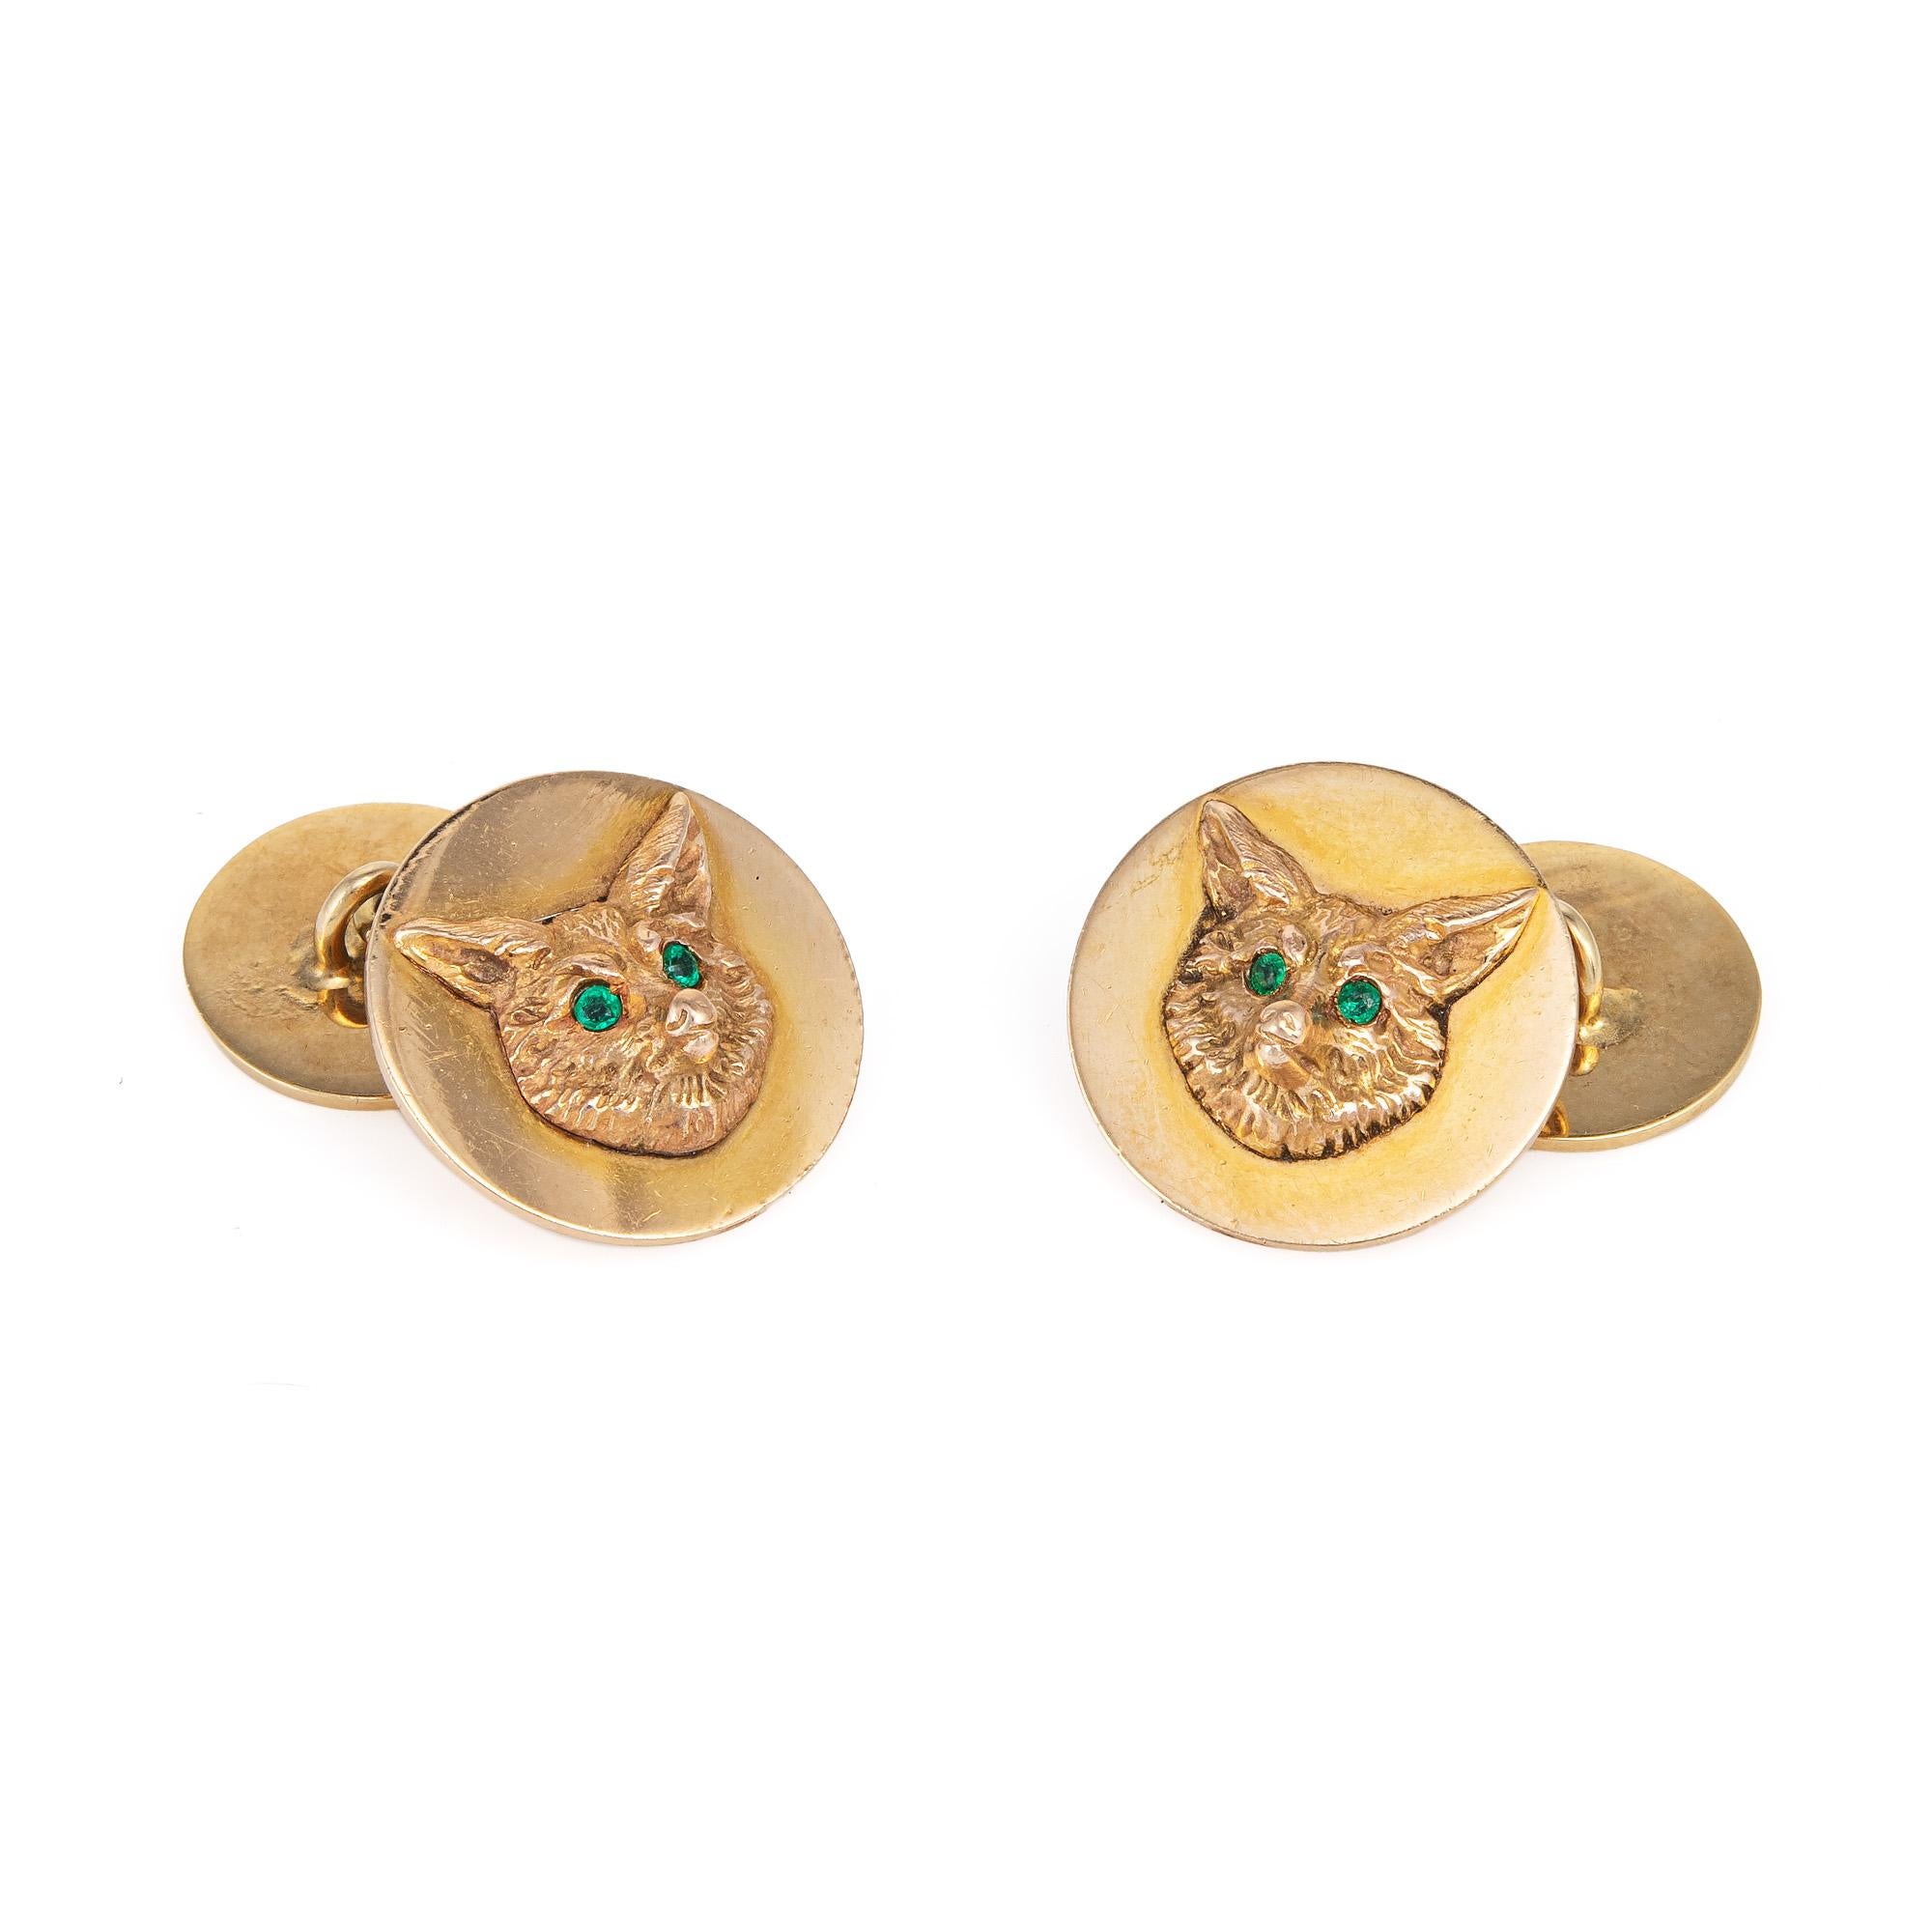 Finely detailed pair of vintage J.E. Caldwell cufflinks (circa 1920s to 1930s), crafted in 14k yellow gold. 

Emeralds are set into the eyes and total an estimated 0.04 carats.

The cufflinks are made by JE Caldwell, the famed American jewelry